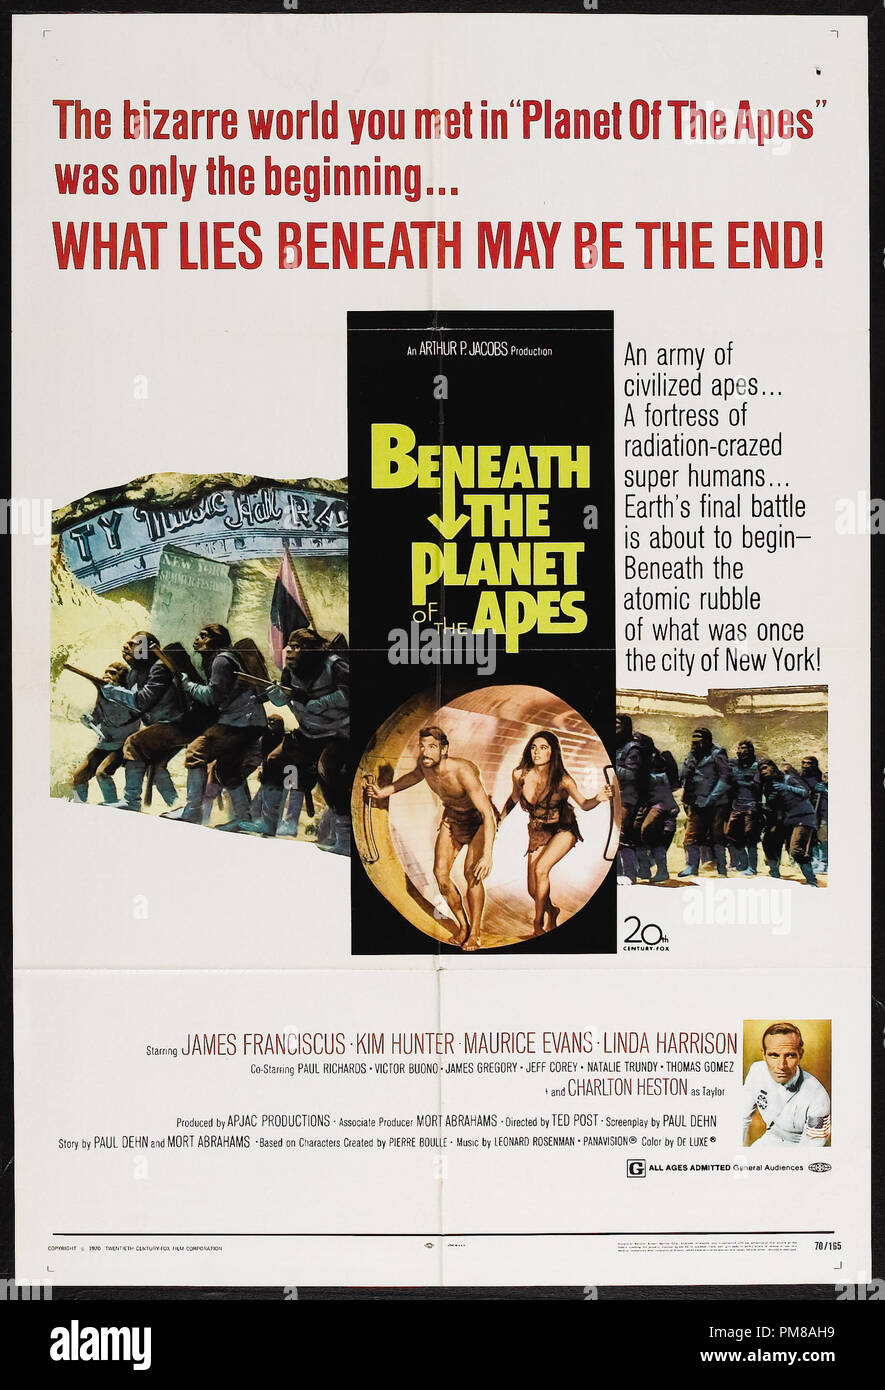 Studio Publicity: 'Beneath the Planet of the Apes' 1970 Beneath the Planet of the Apes' 20th Century Fox  Poster  James Franciscus, Kim Hunter, Maurice Evans  File Reference # 31780 763 Stock Photo